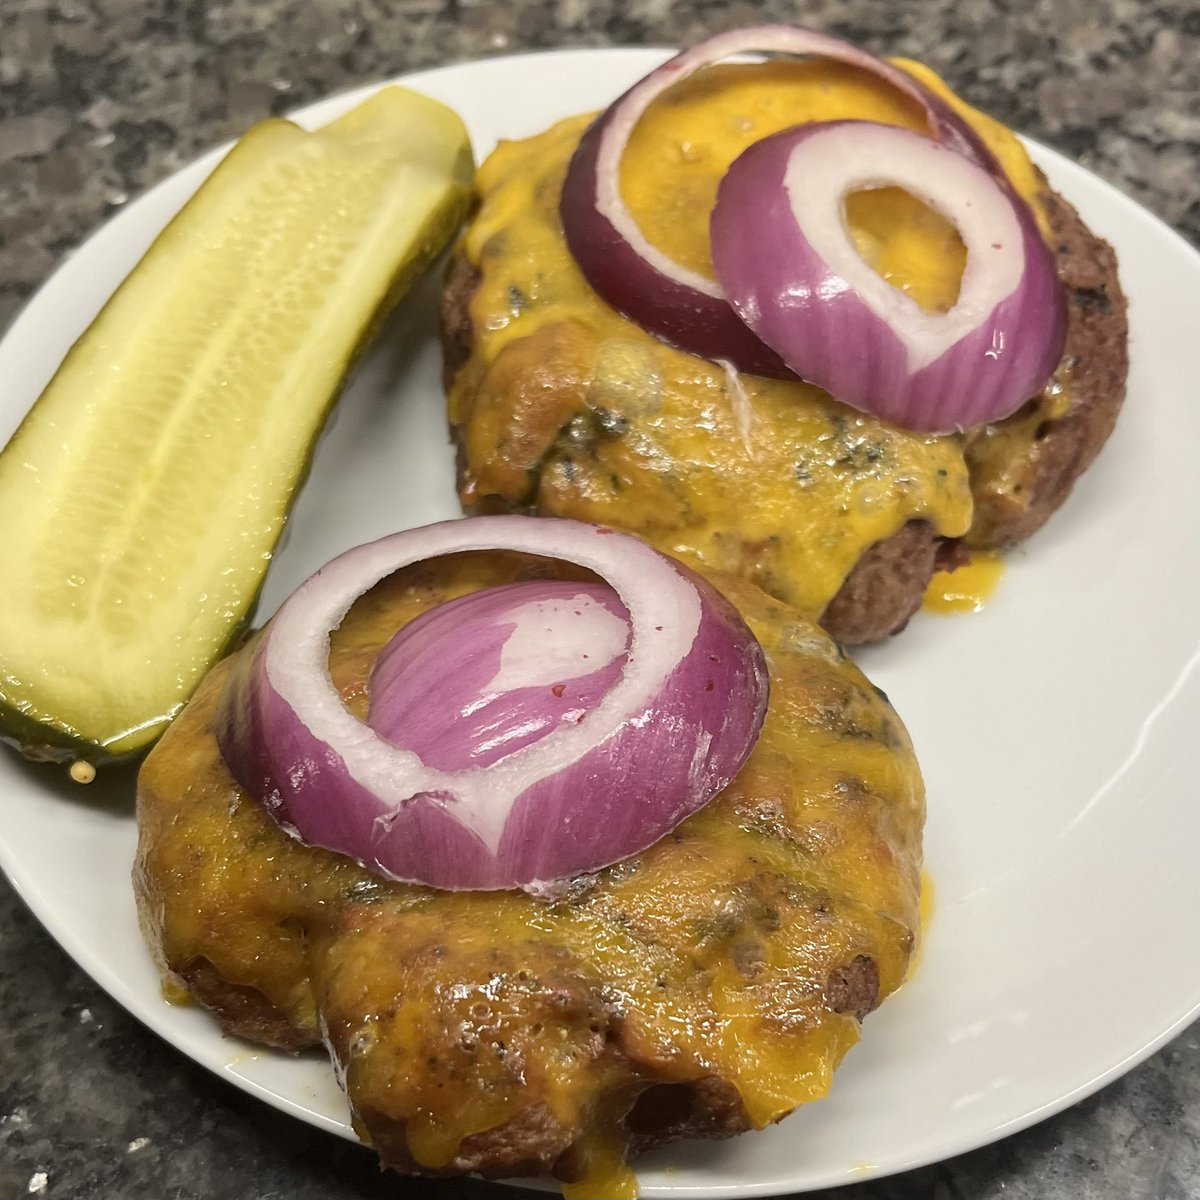 Two 3/4 pound turkey burgers with onions & cheddar, with a pickle on the side. Good satiety.